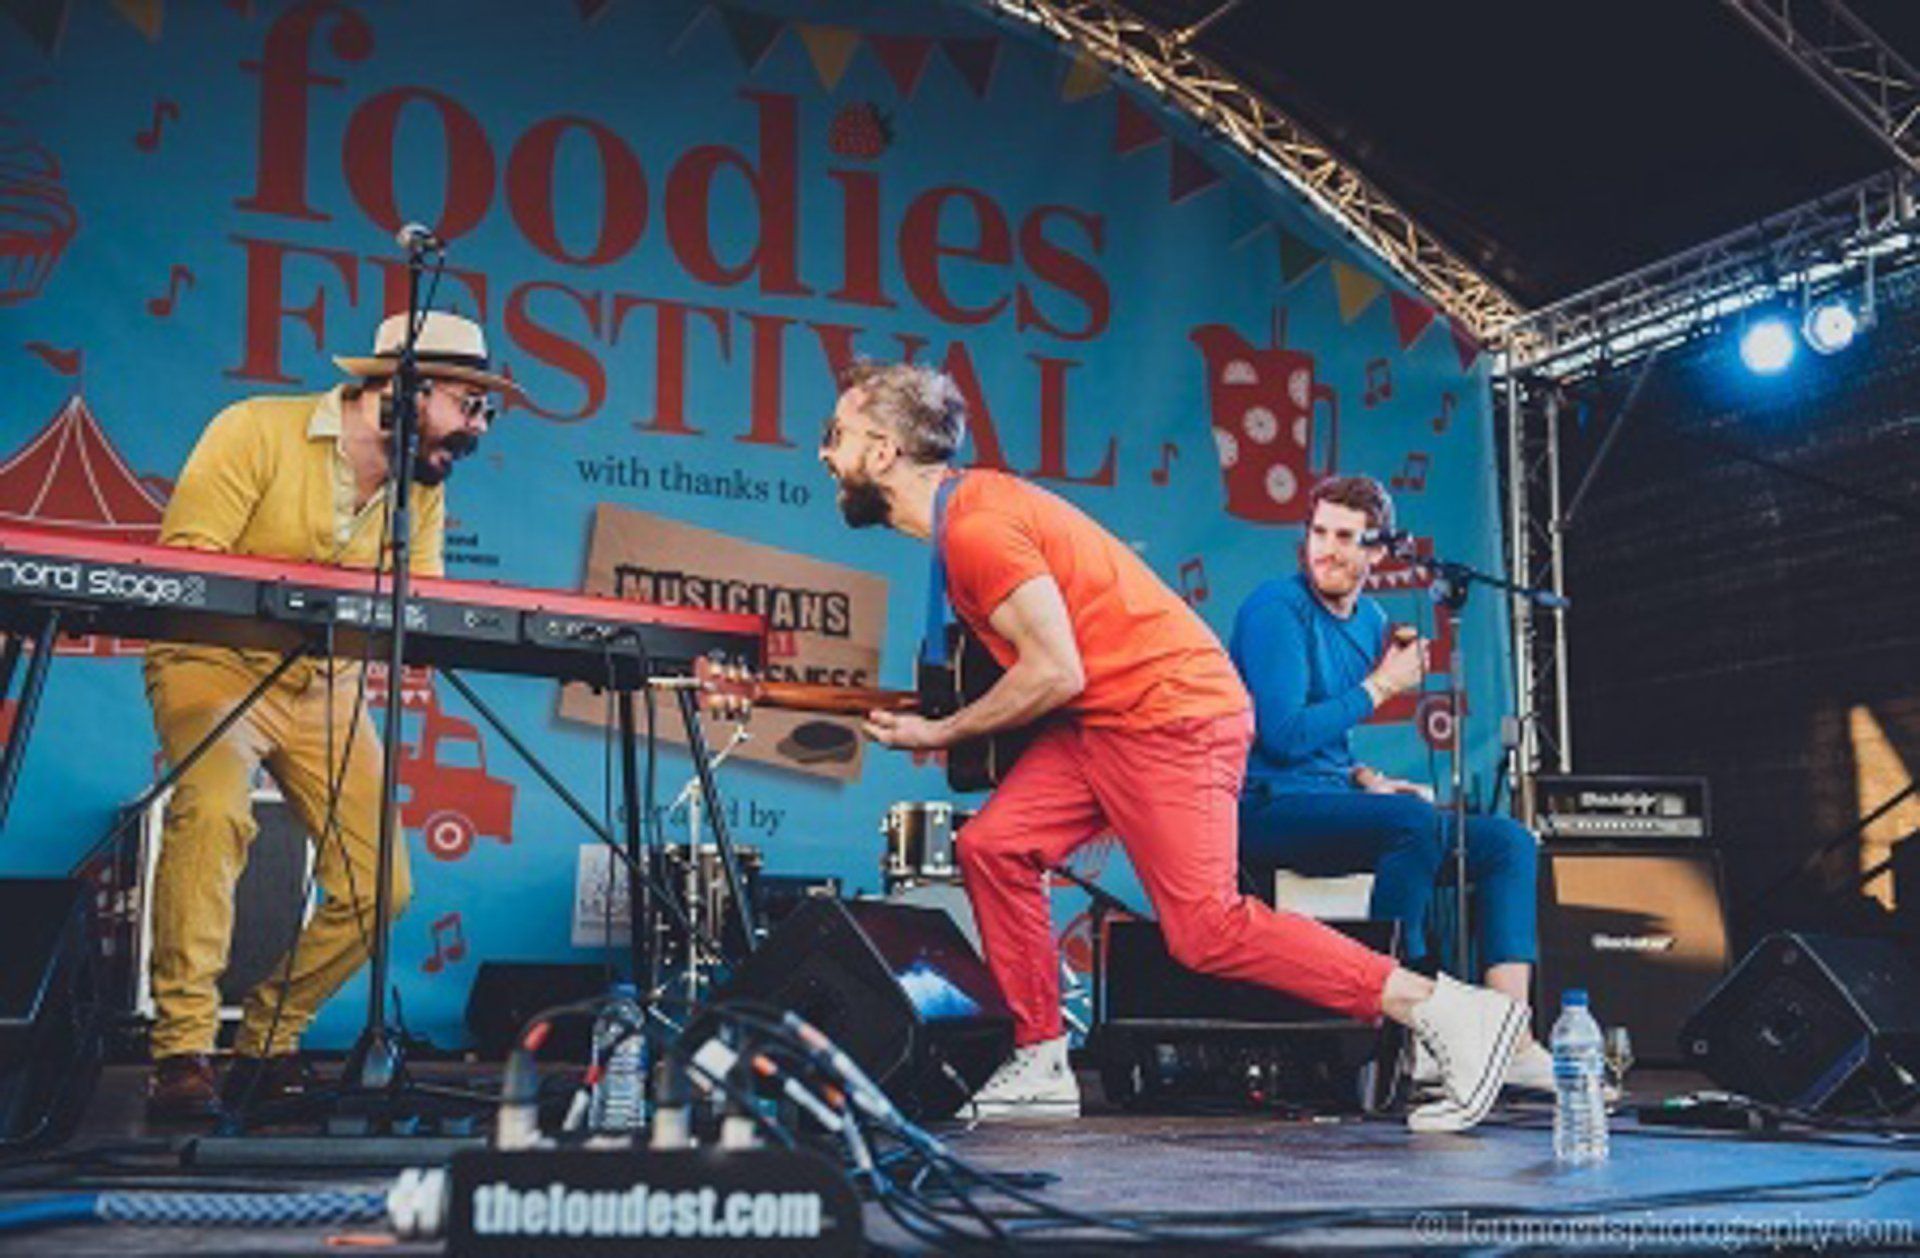 Close up of a band playing on a large arc truss stage set up for the foodies festival on a long term contract